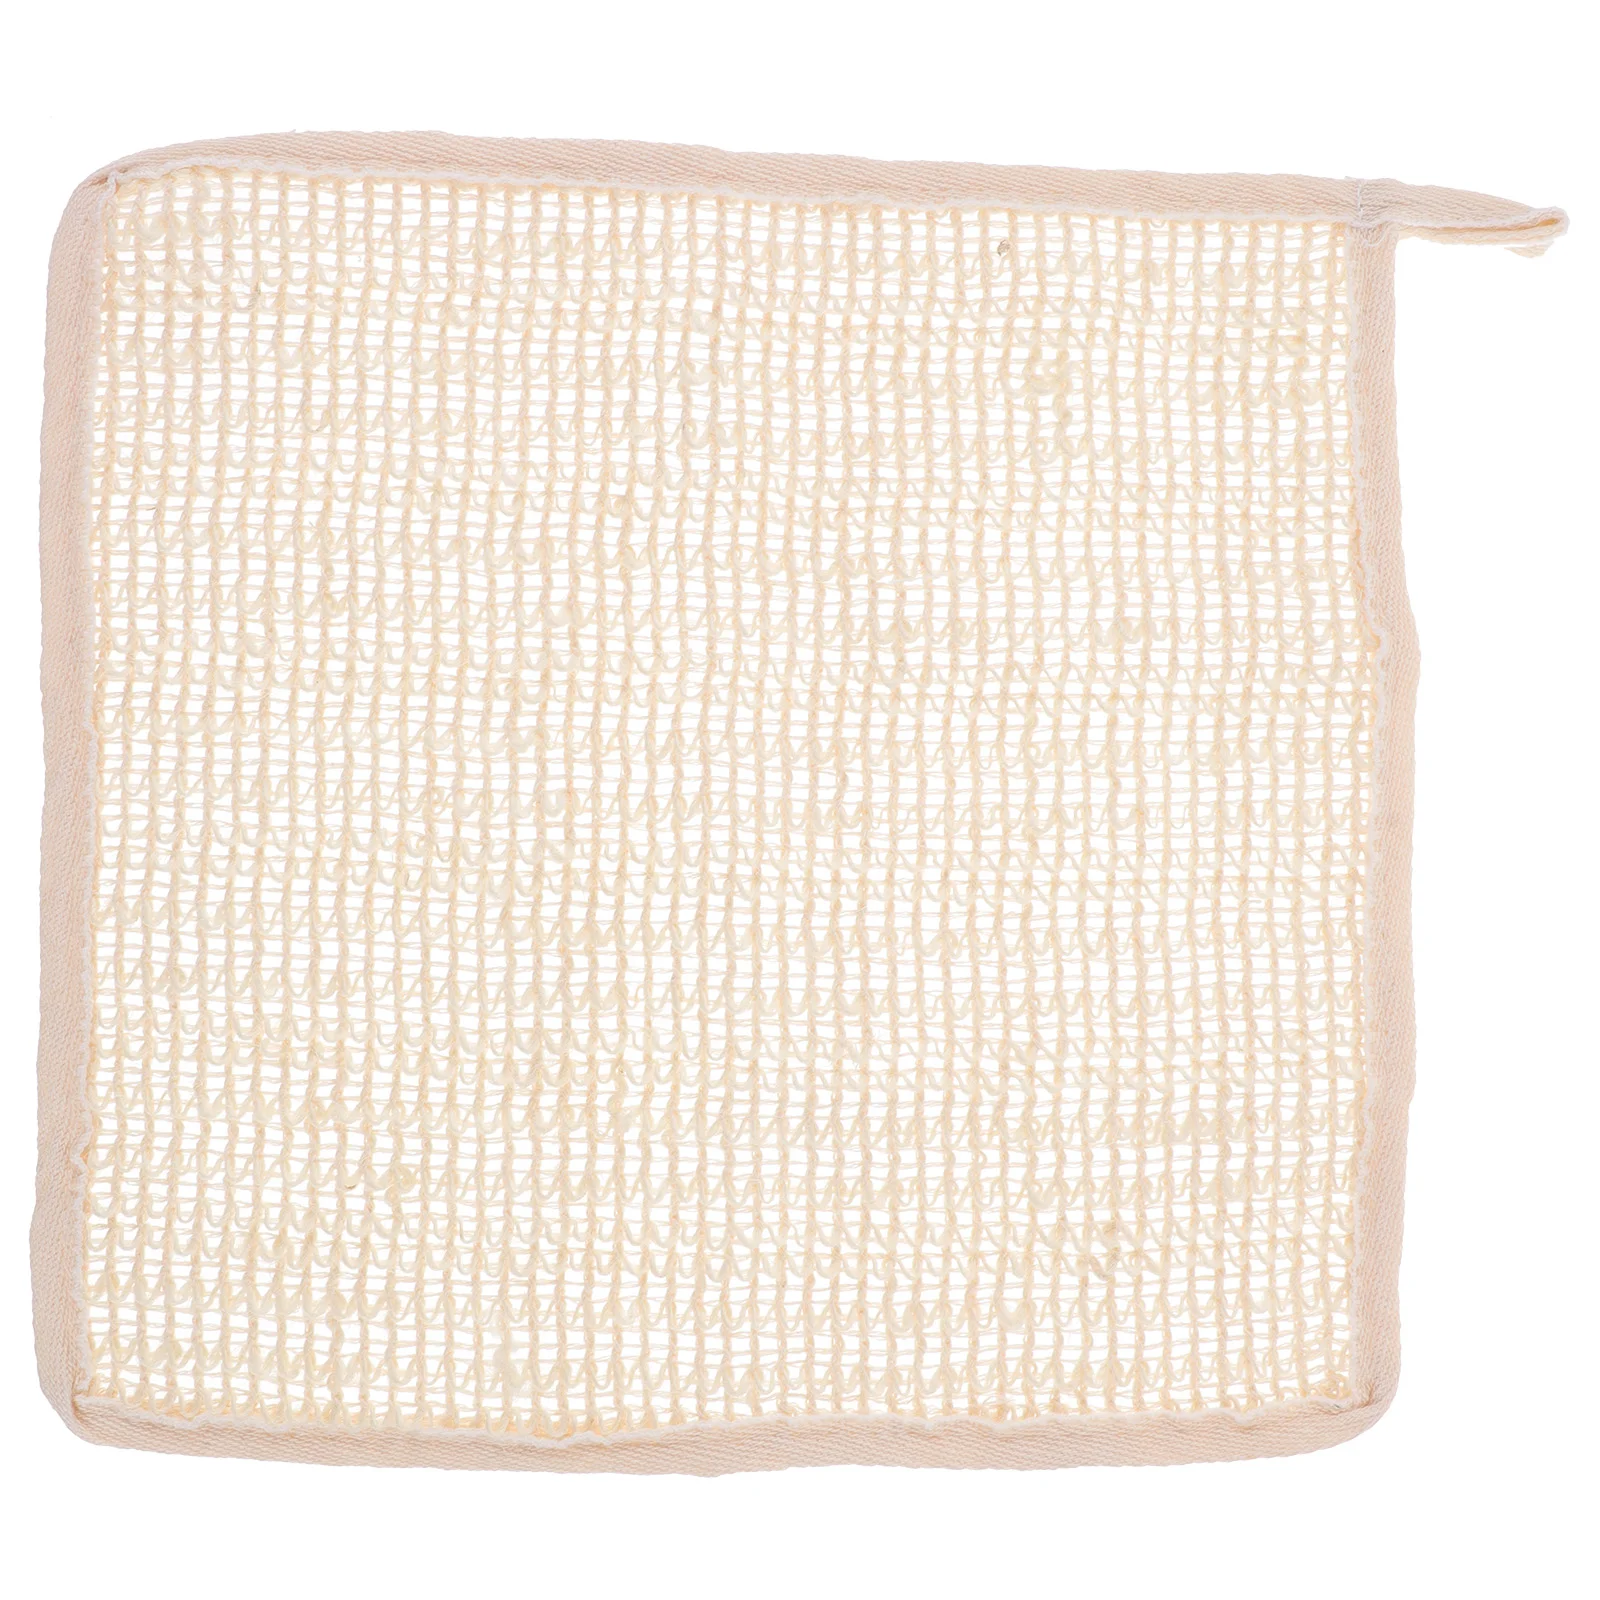 

Bath Towel Body Towels Shower Scrubbing Exfoliating Washclothes Frosted Cleaning Ramie Scrubbers Travel Long Strip